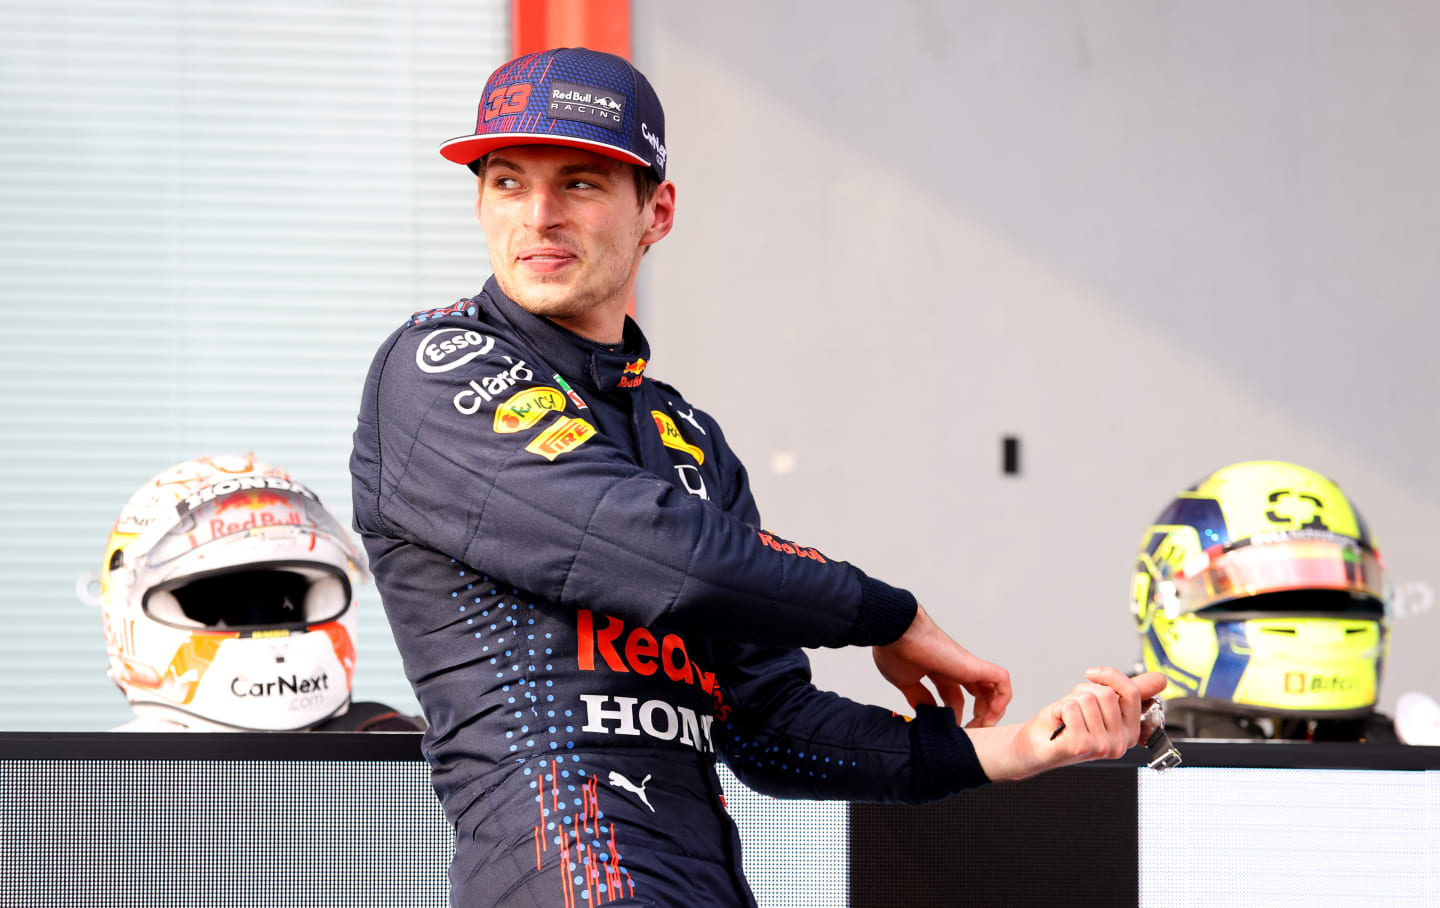 IMOLA, ITALY - APRIL 18: Race winner Max Verstappen of Netherlands and Red Bull Racing celebrates in parc ferme during the F1 Grand Prix of Emilia Romagna at Autodromo Enzo e Dino Ferrari on April 18, 2021 in Imola, Italy. (Photo by Bryn Lennon/Getty Images)